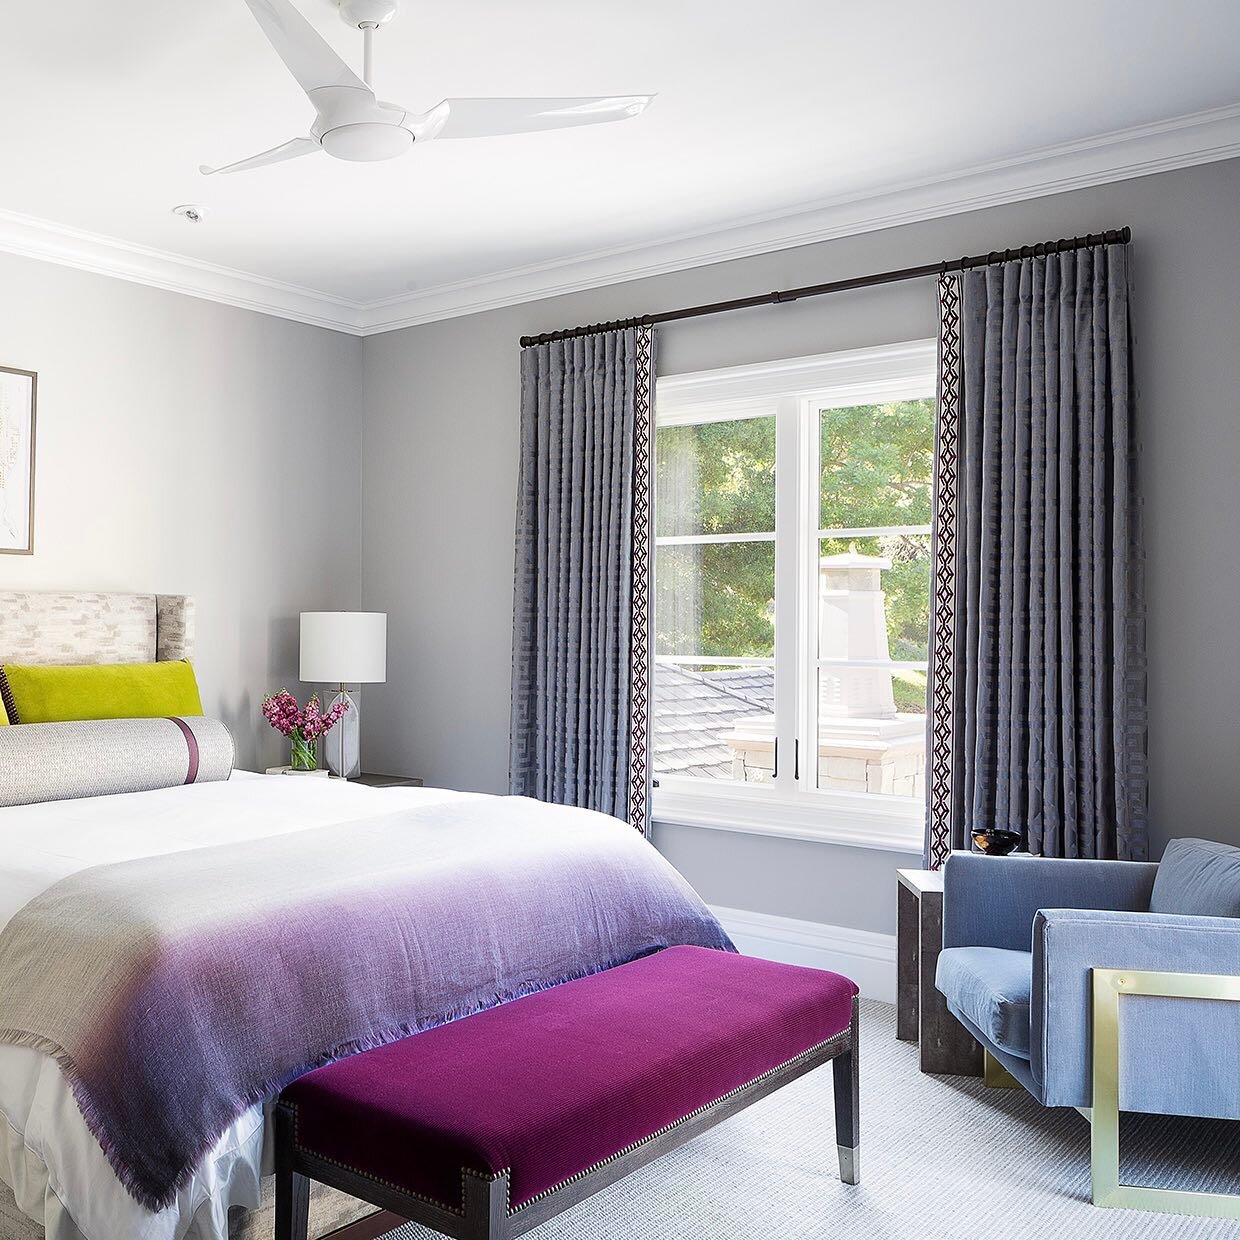 Vibrant accents of color added the needed interest in this guest bedroom. #interiordesigner #  #interiordecorating @mariatenagliadesign @dyerphoto